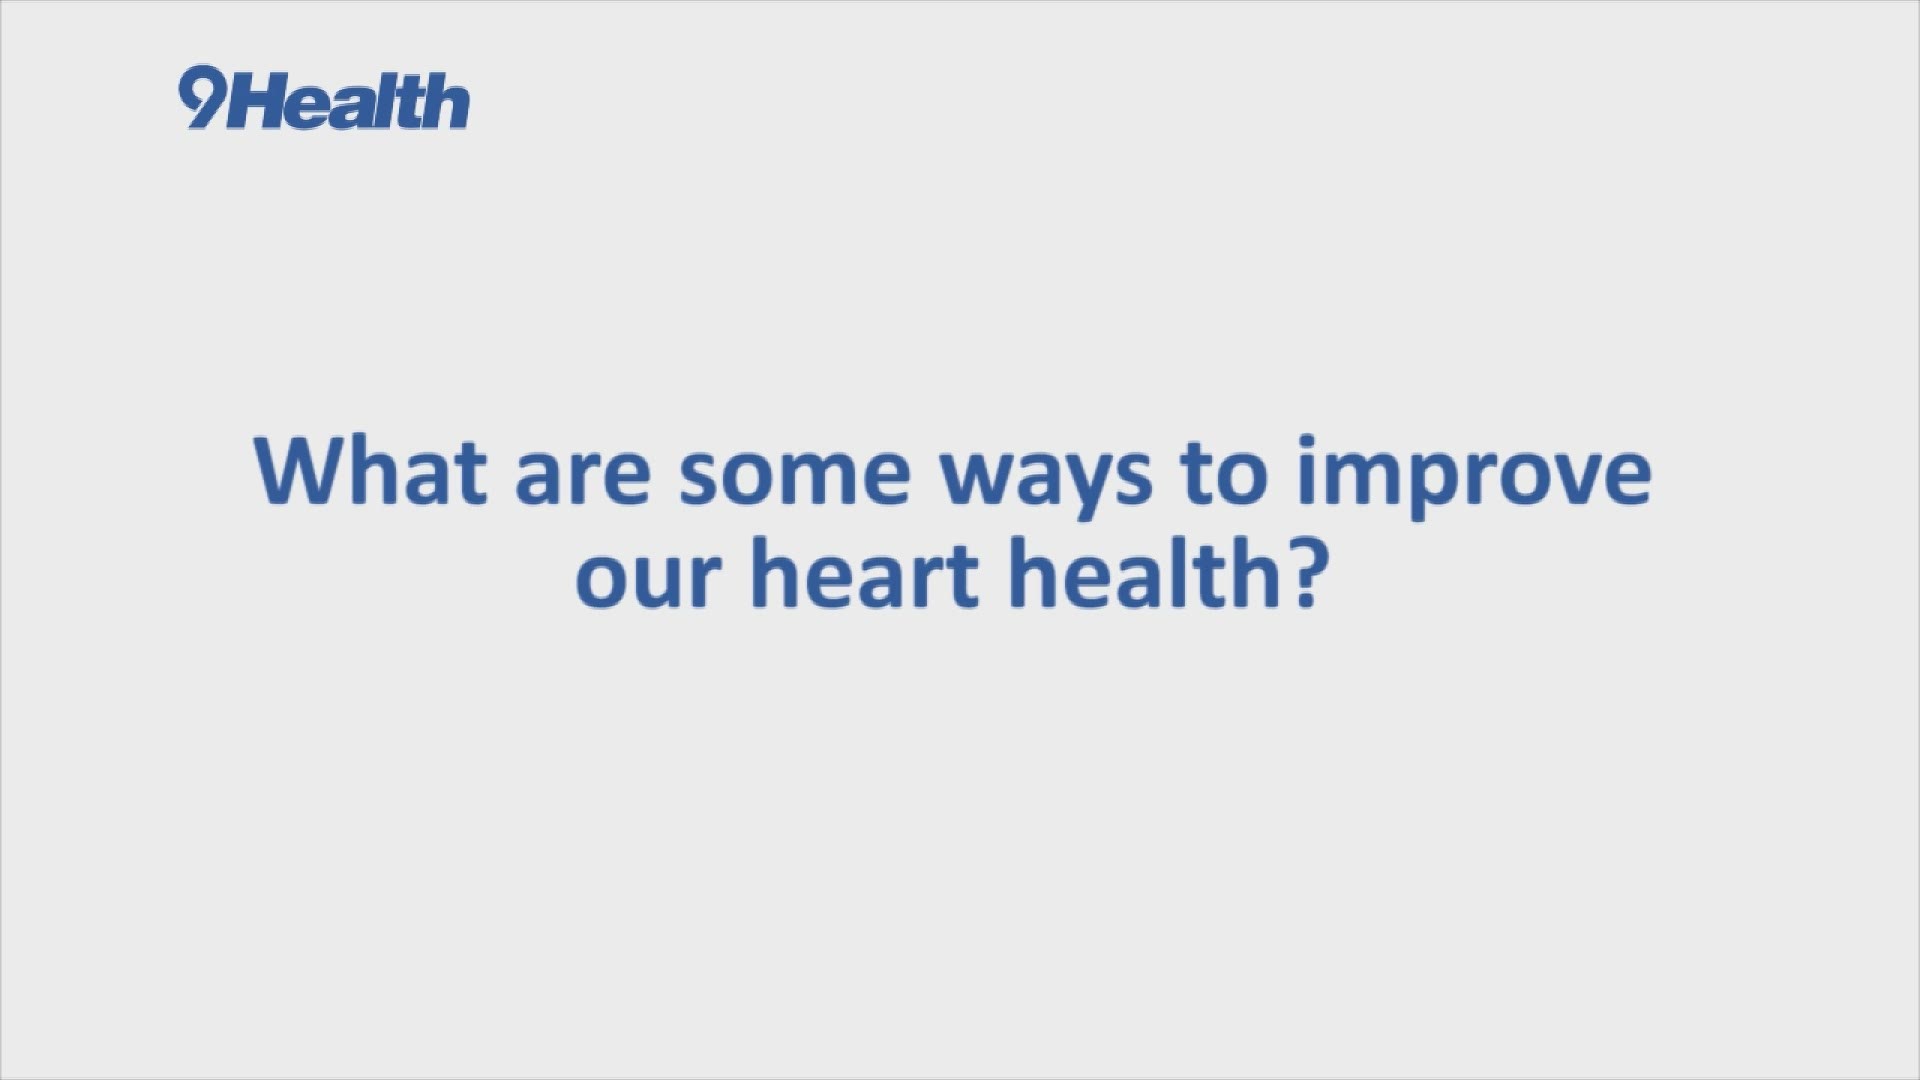 Heart health is one factor that affects your risk for severe illness from COVID-19. Check-in on your heart with the blood chemistry screening from 9Health